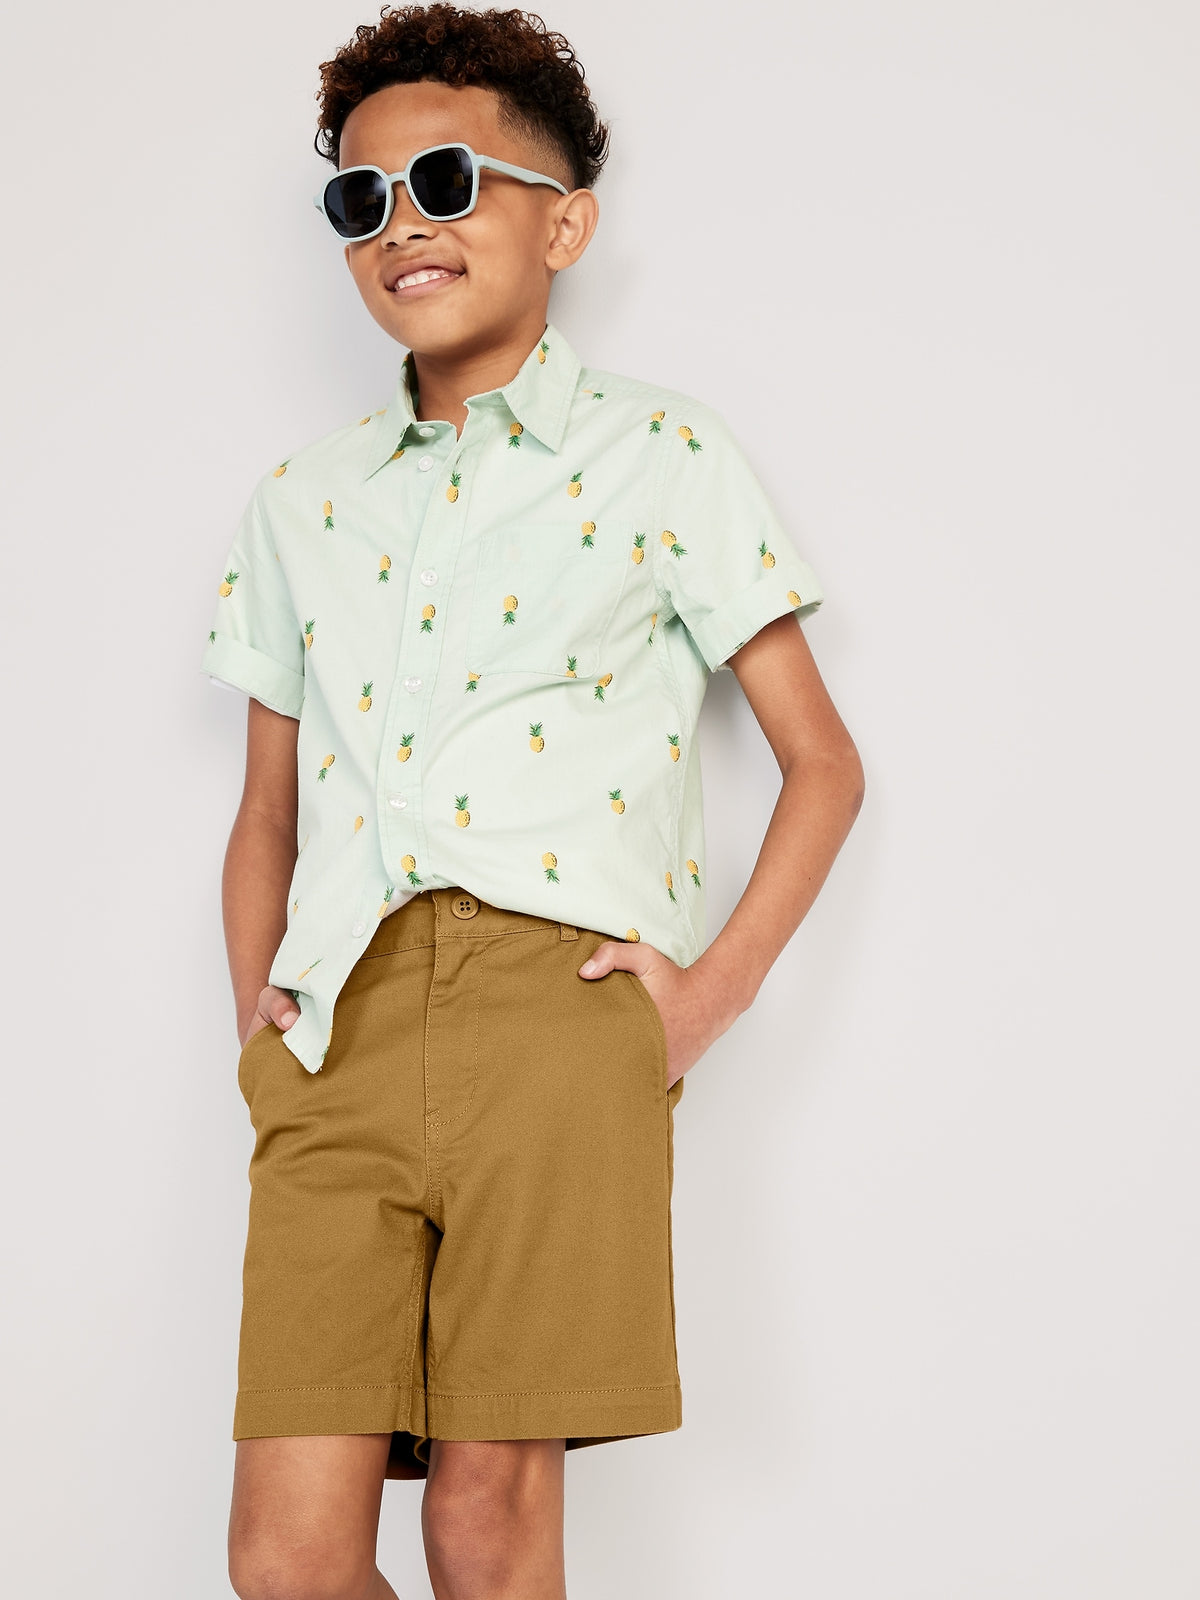 Built-In Flex Twill Jogger Pants for Boys - Old Navy Philippines